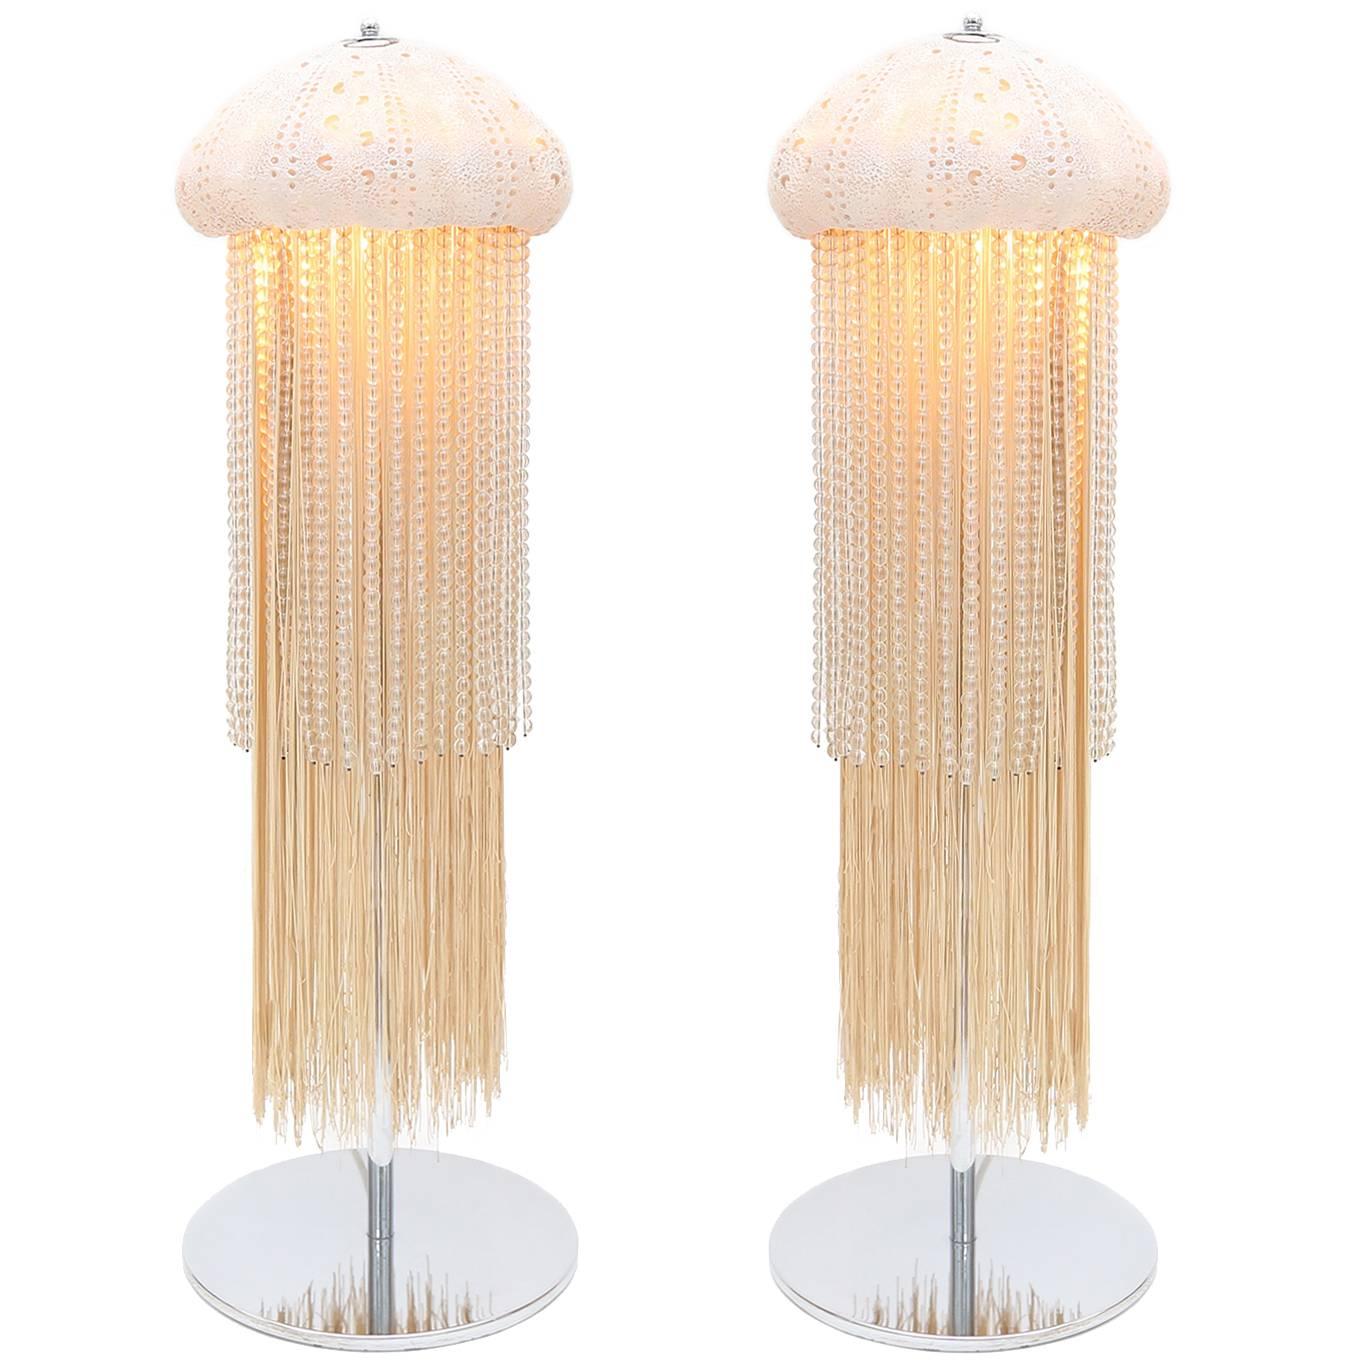 Jacques Garcia Jelly Fish Floor Lamp